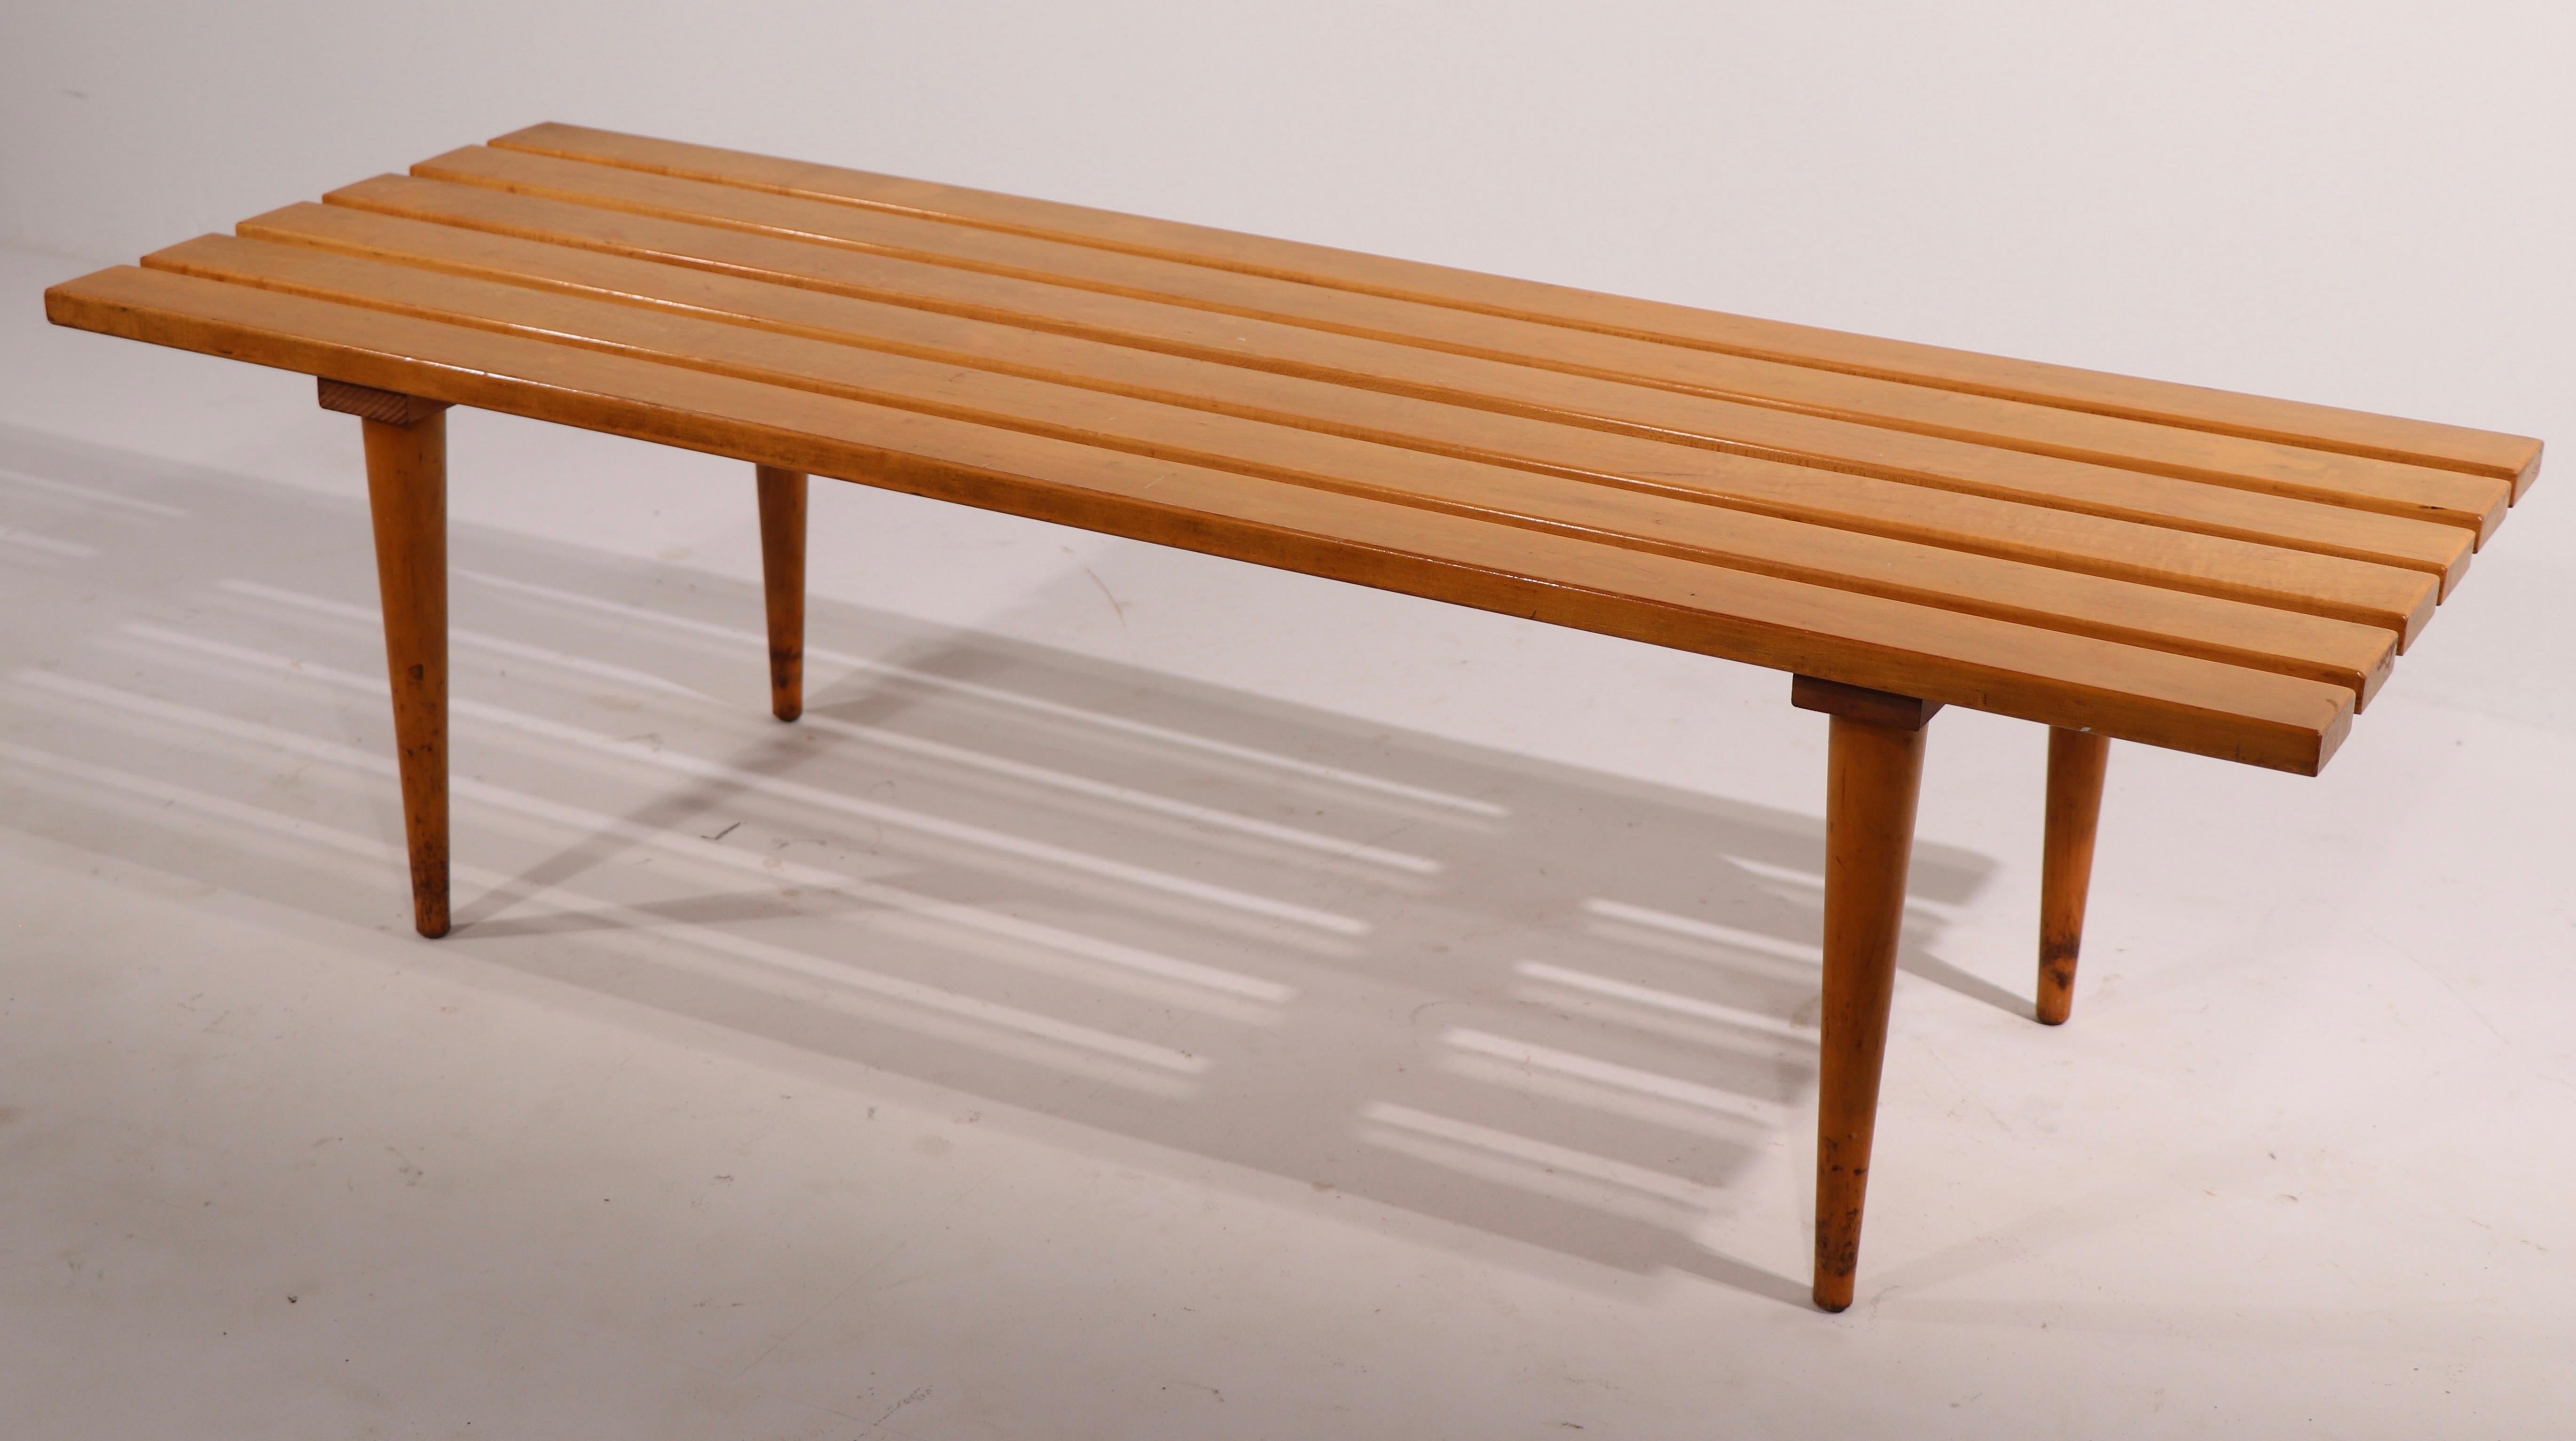 Iconic slat bench coffee table, made in Yugoslavia. This examples solid maple, unusual to see this form in the blonde finish, as most are in dark wood. Classic architectural Mid Century design, simple, chic and sophisticated. The table is in good,